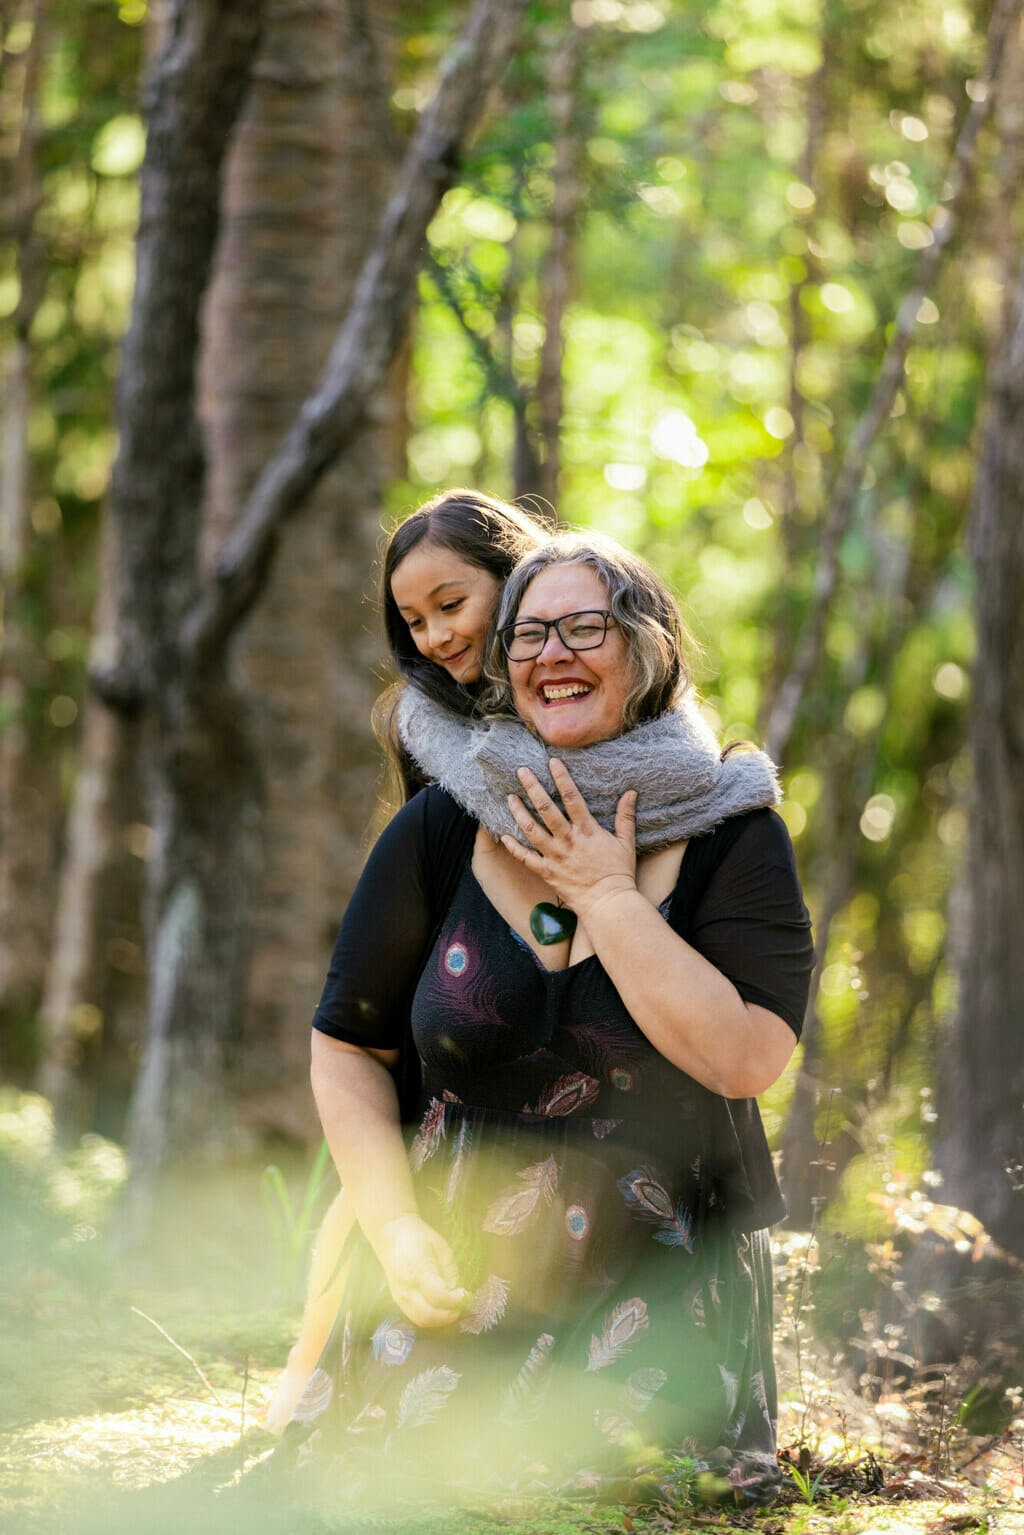 whāngai is the practice of open adoption within Māoridom where whānau members are given a child to raise as their own.